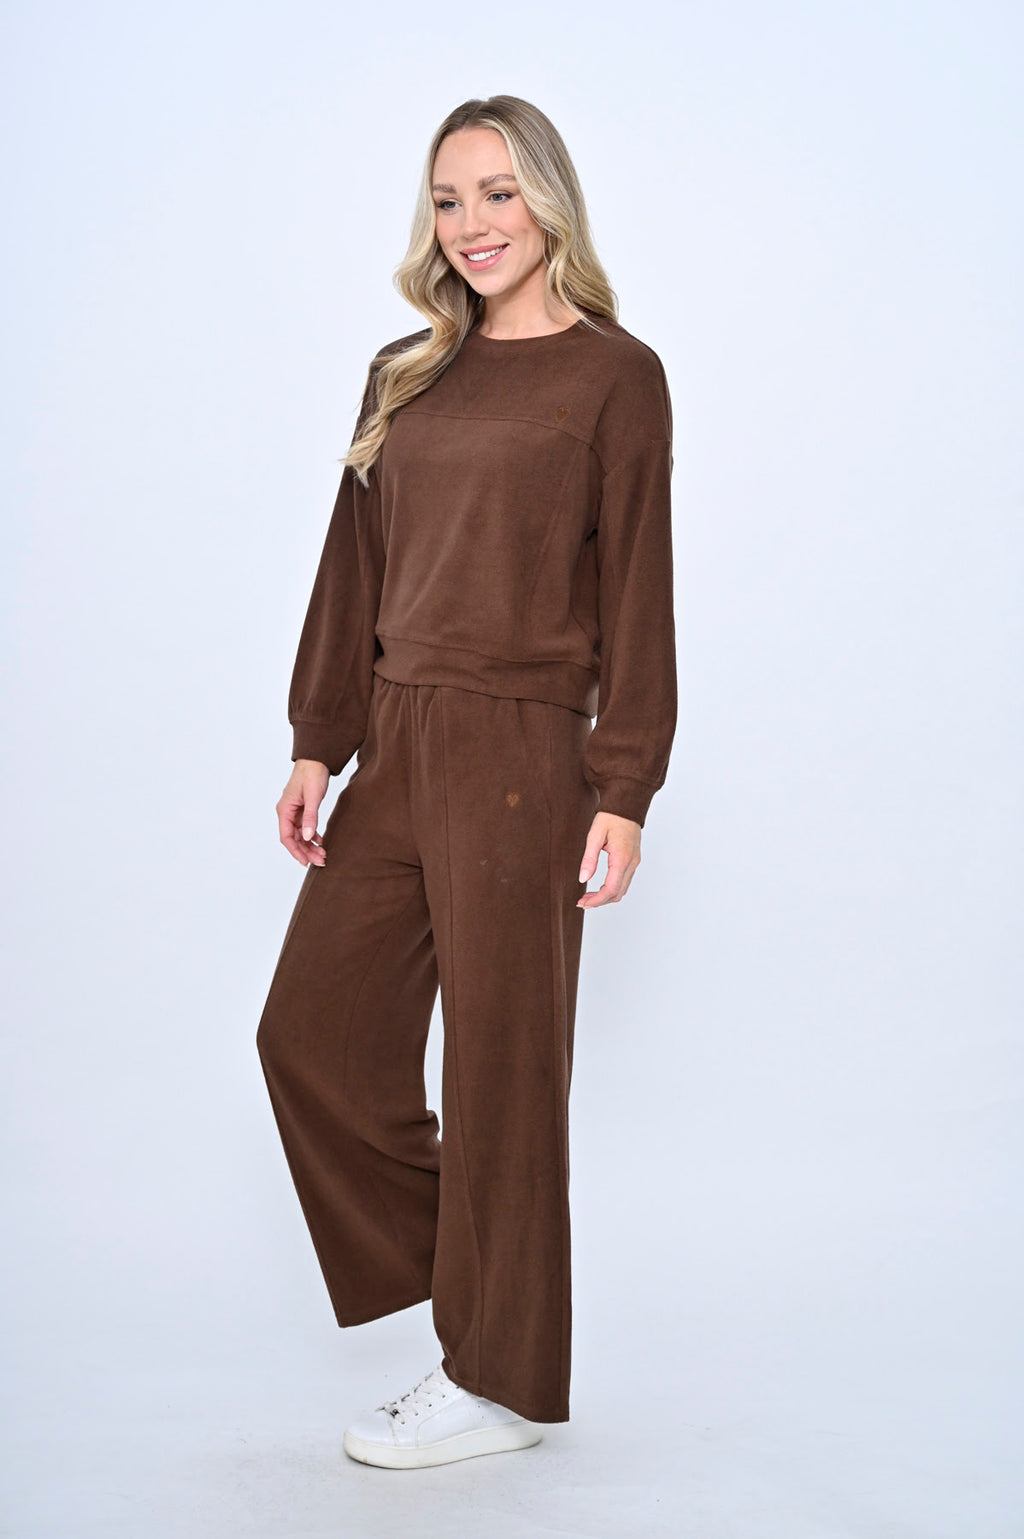 a velour chocolate brown tracksuit sweater